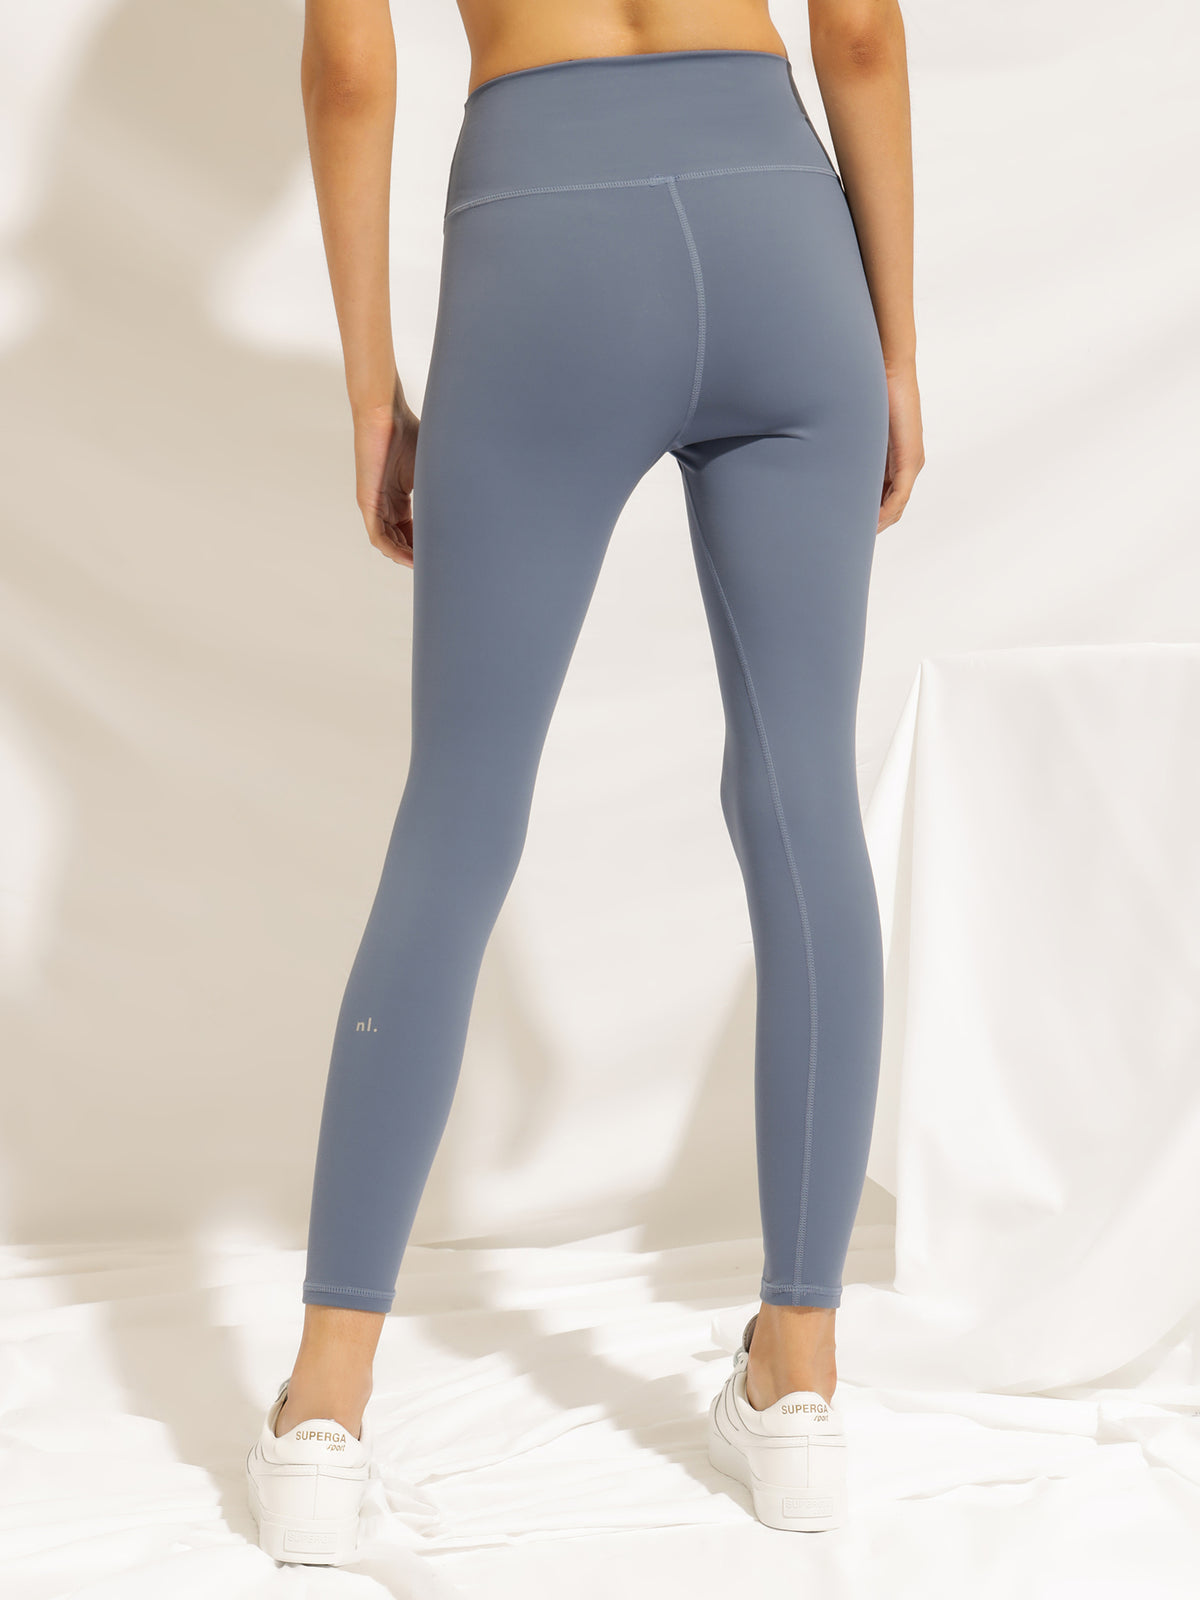 Nude Active High-Rise 7/8 Leggings in Bluebottle